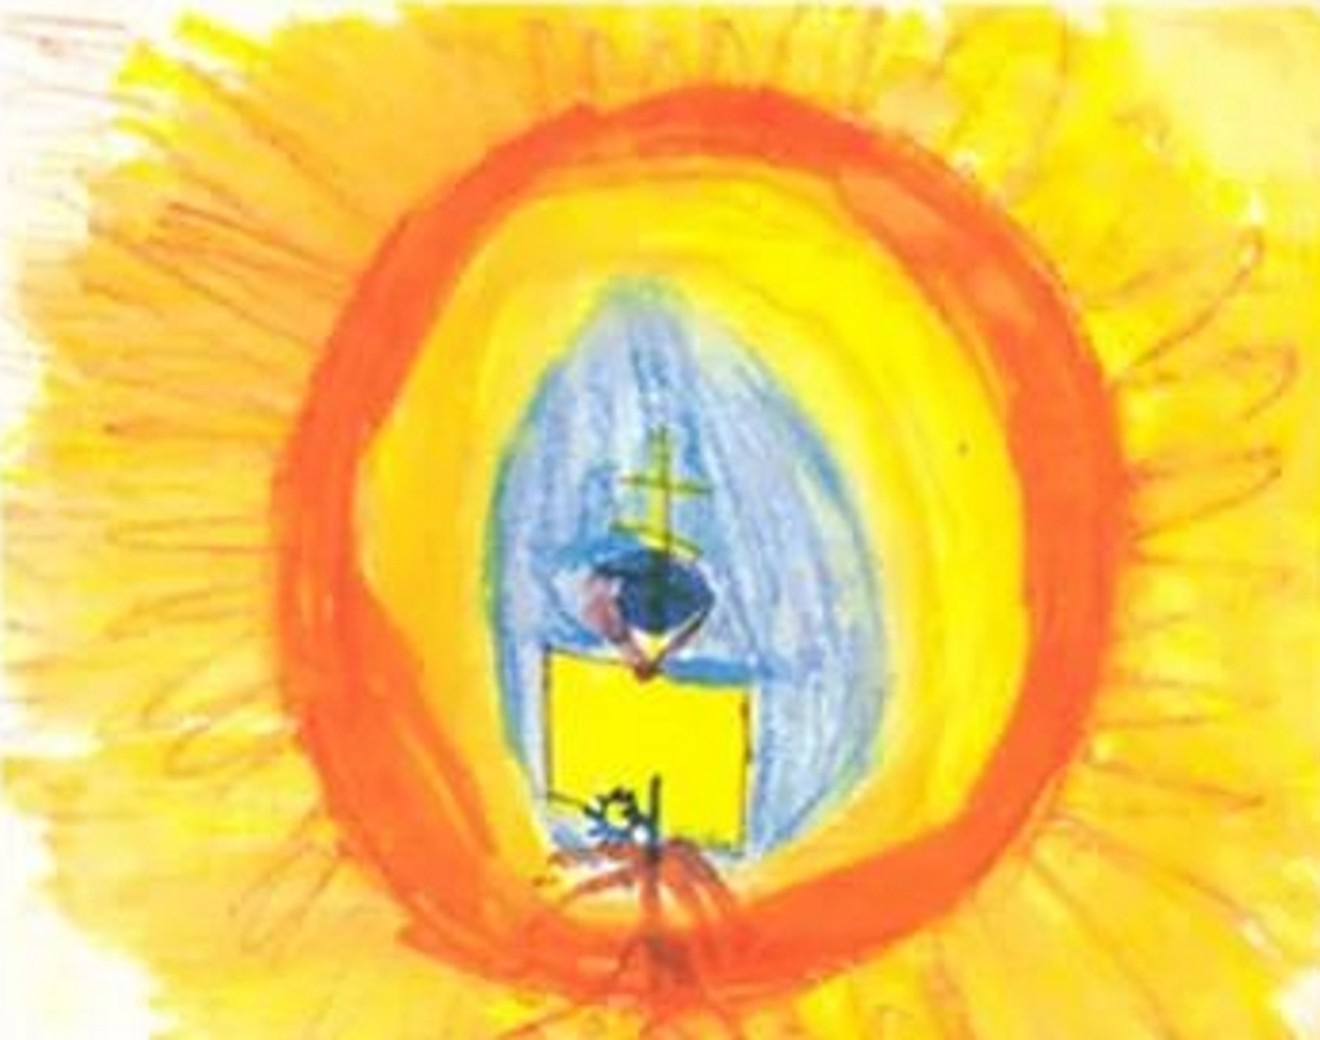 This drawing is by Benjamin Saar, who died at 8 from AIDS-related complications. Saar is the subject of The Yellow Boat.